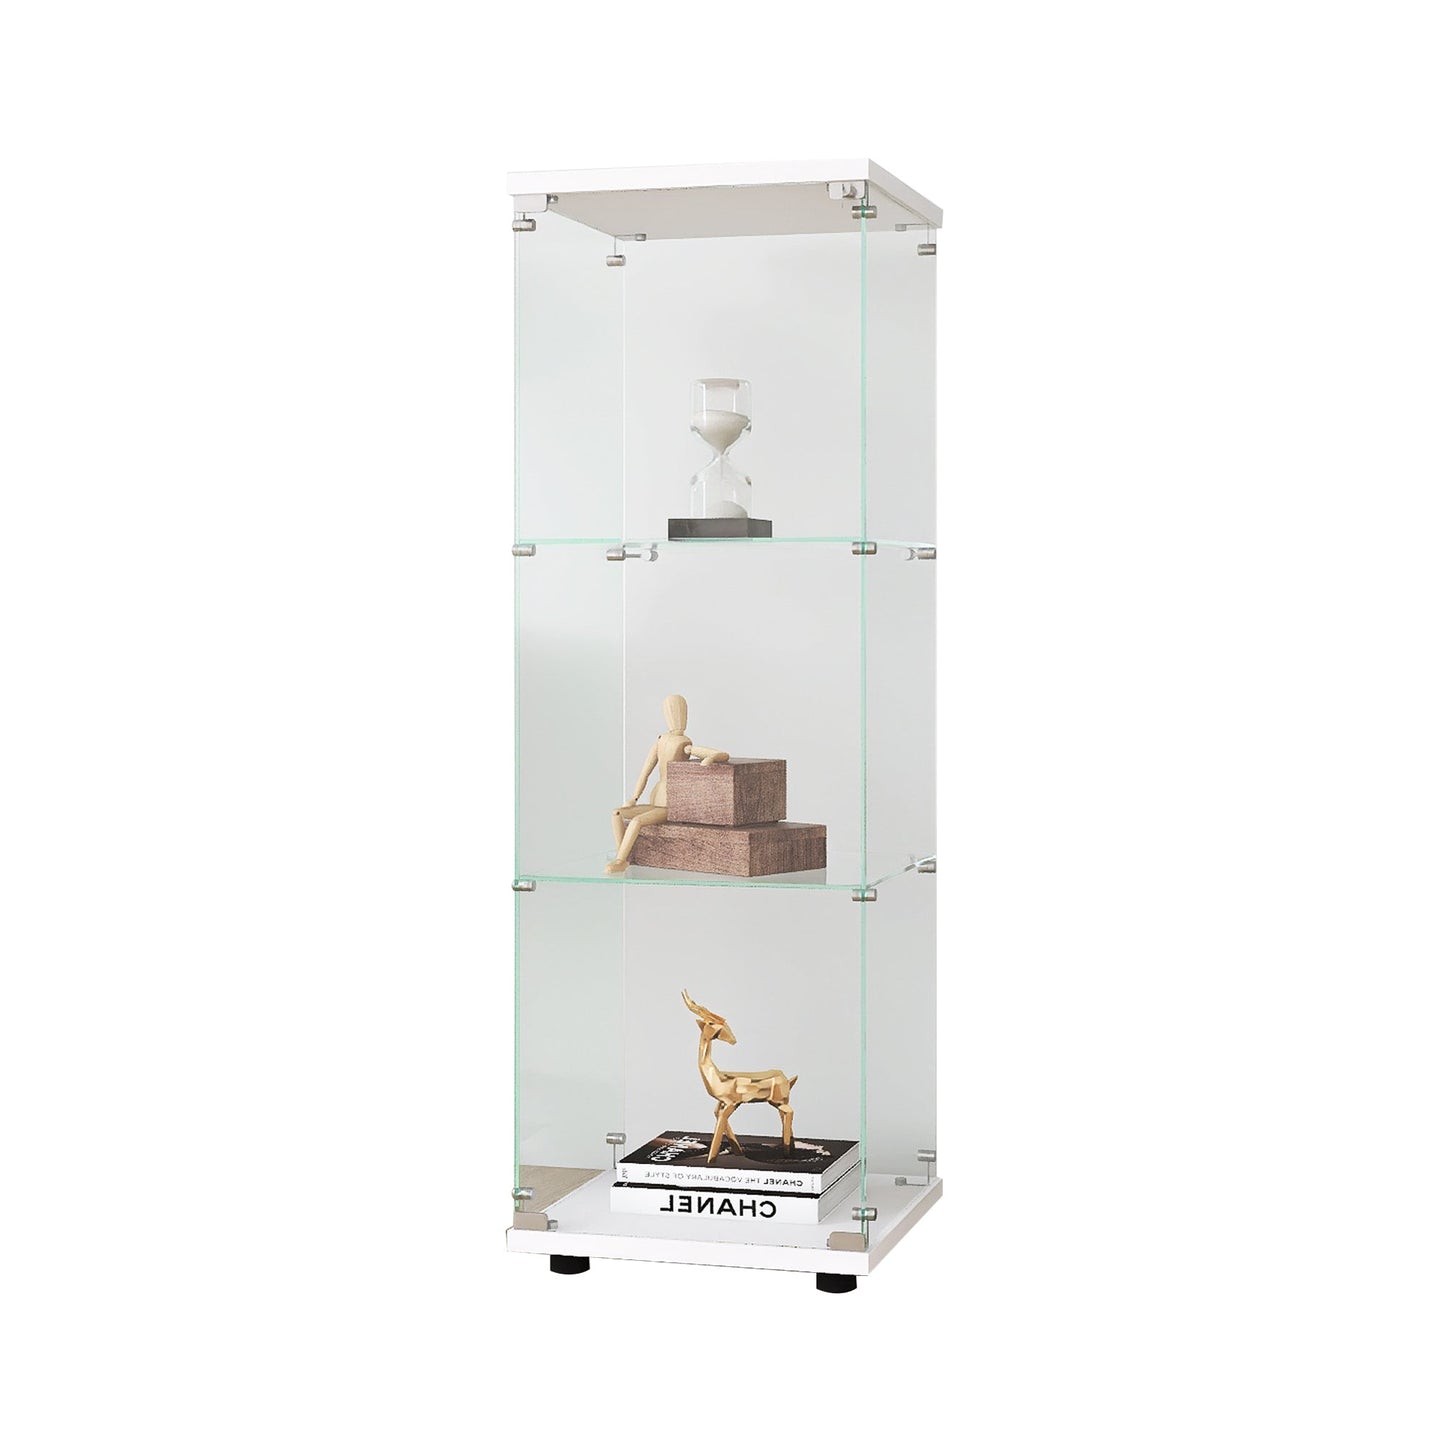 Glass Display Cabinet with 3 Shelves, One-Door Curio Cabinets for Living Room, Bedroom, Office, White Floor Standing Glass Bookshelf, Quick Installation